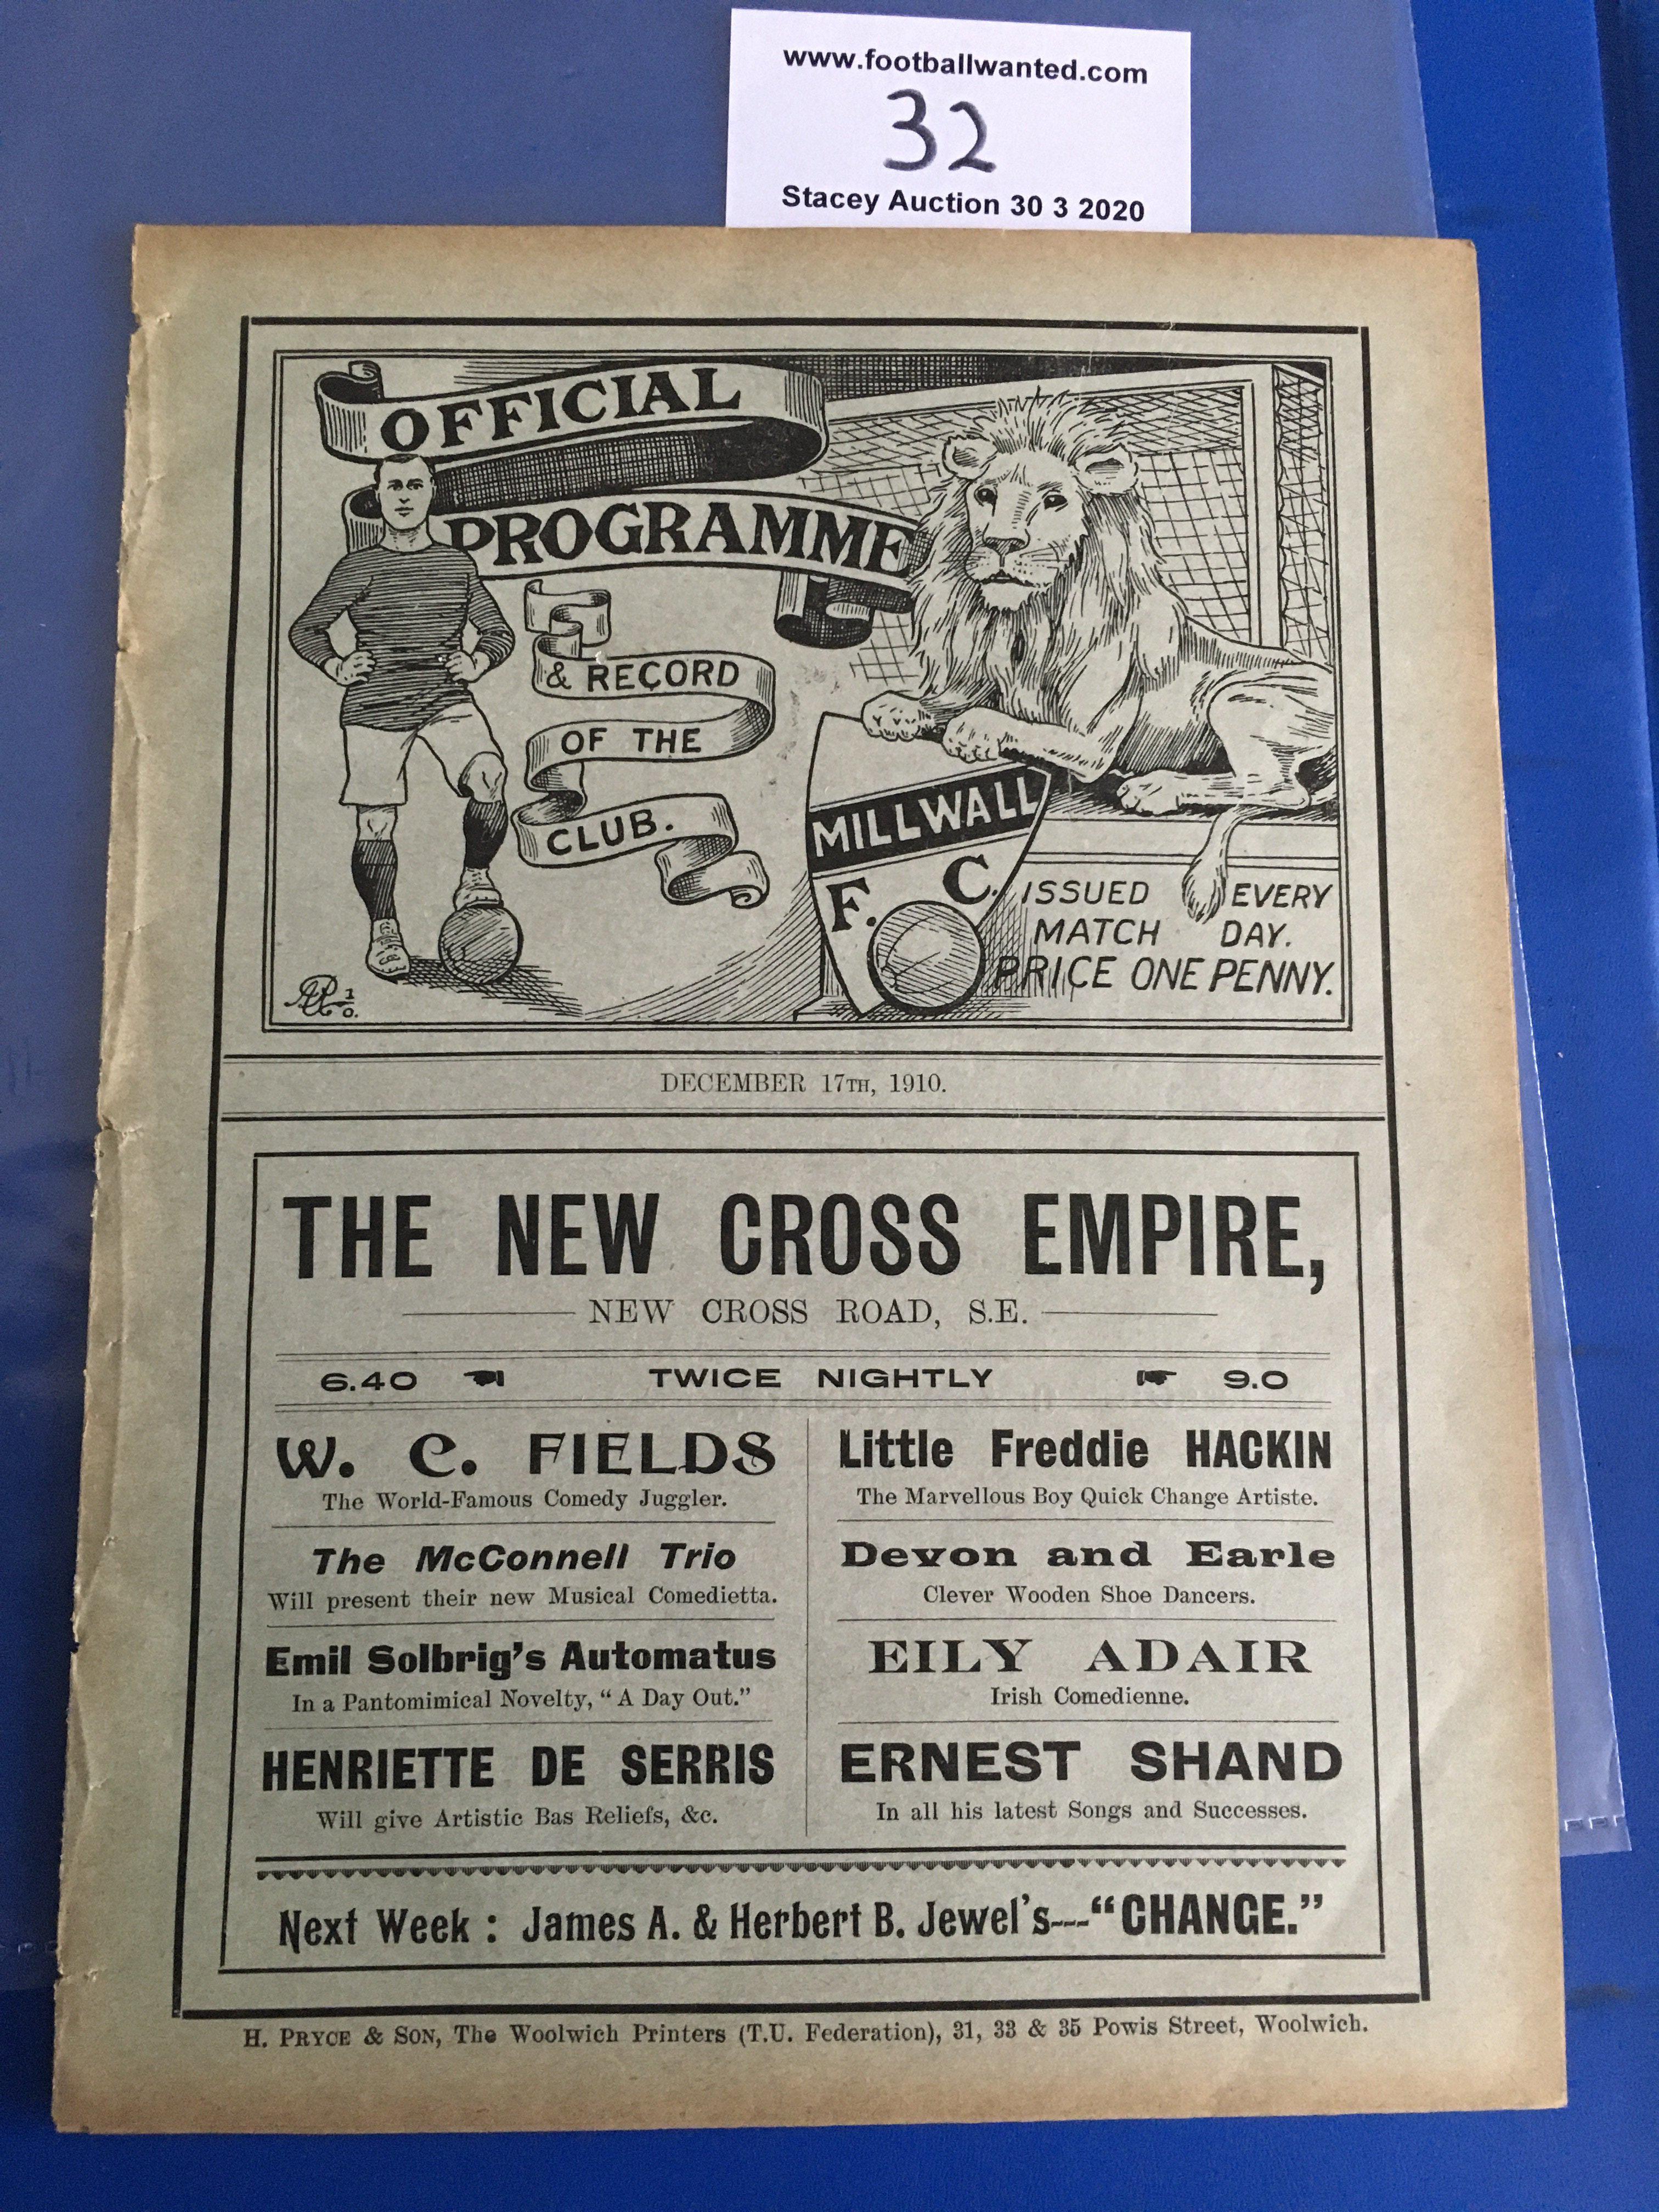 1910/11 Millwall v Plymouth Argyle Football Programme: First team Southern League Division One match